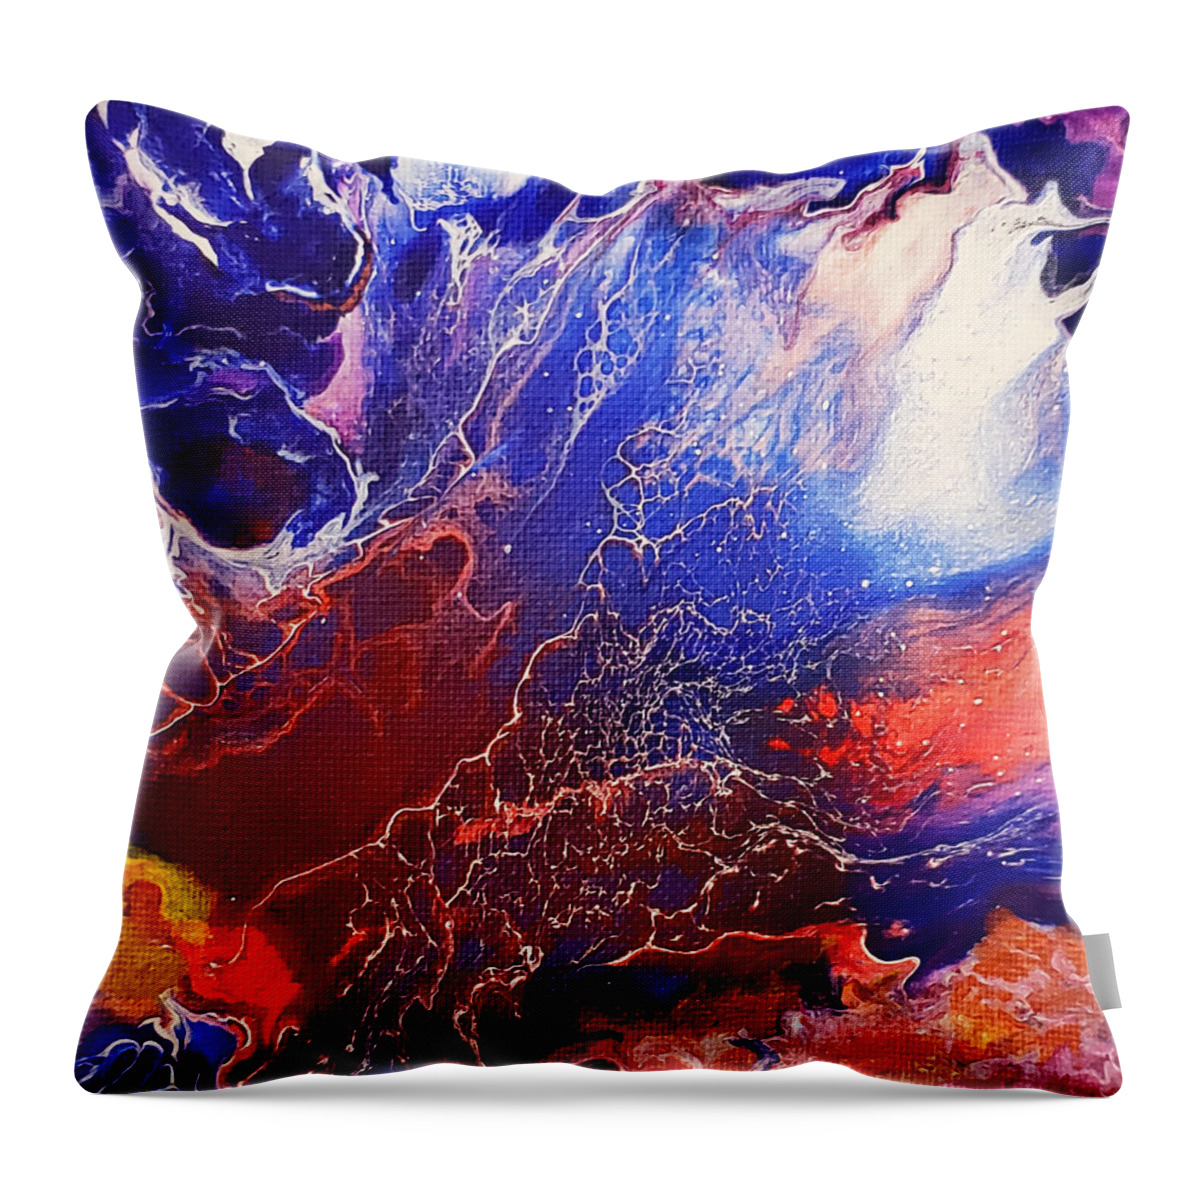 Fires Throw Pillow featuring the painting Fires by Christine Bolden